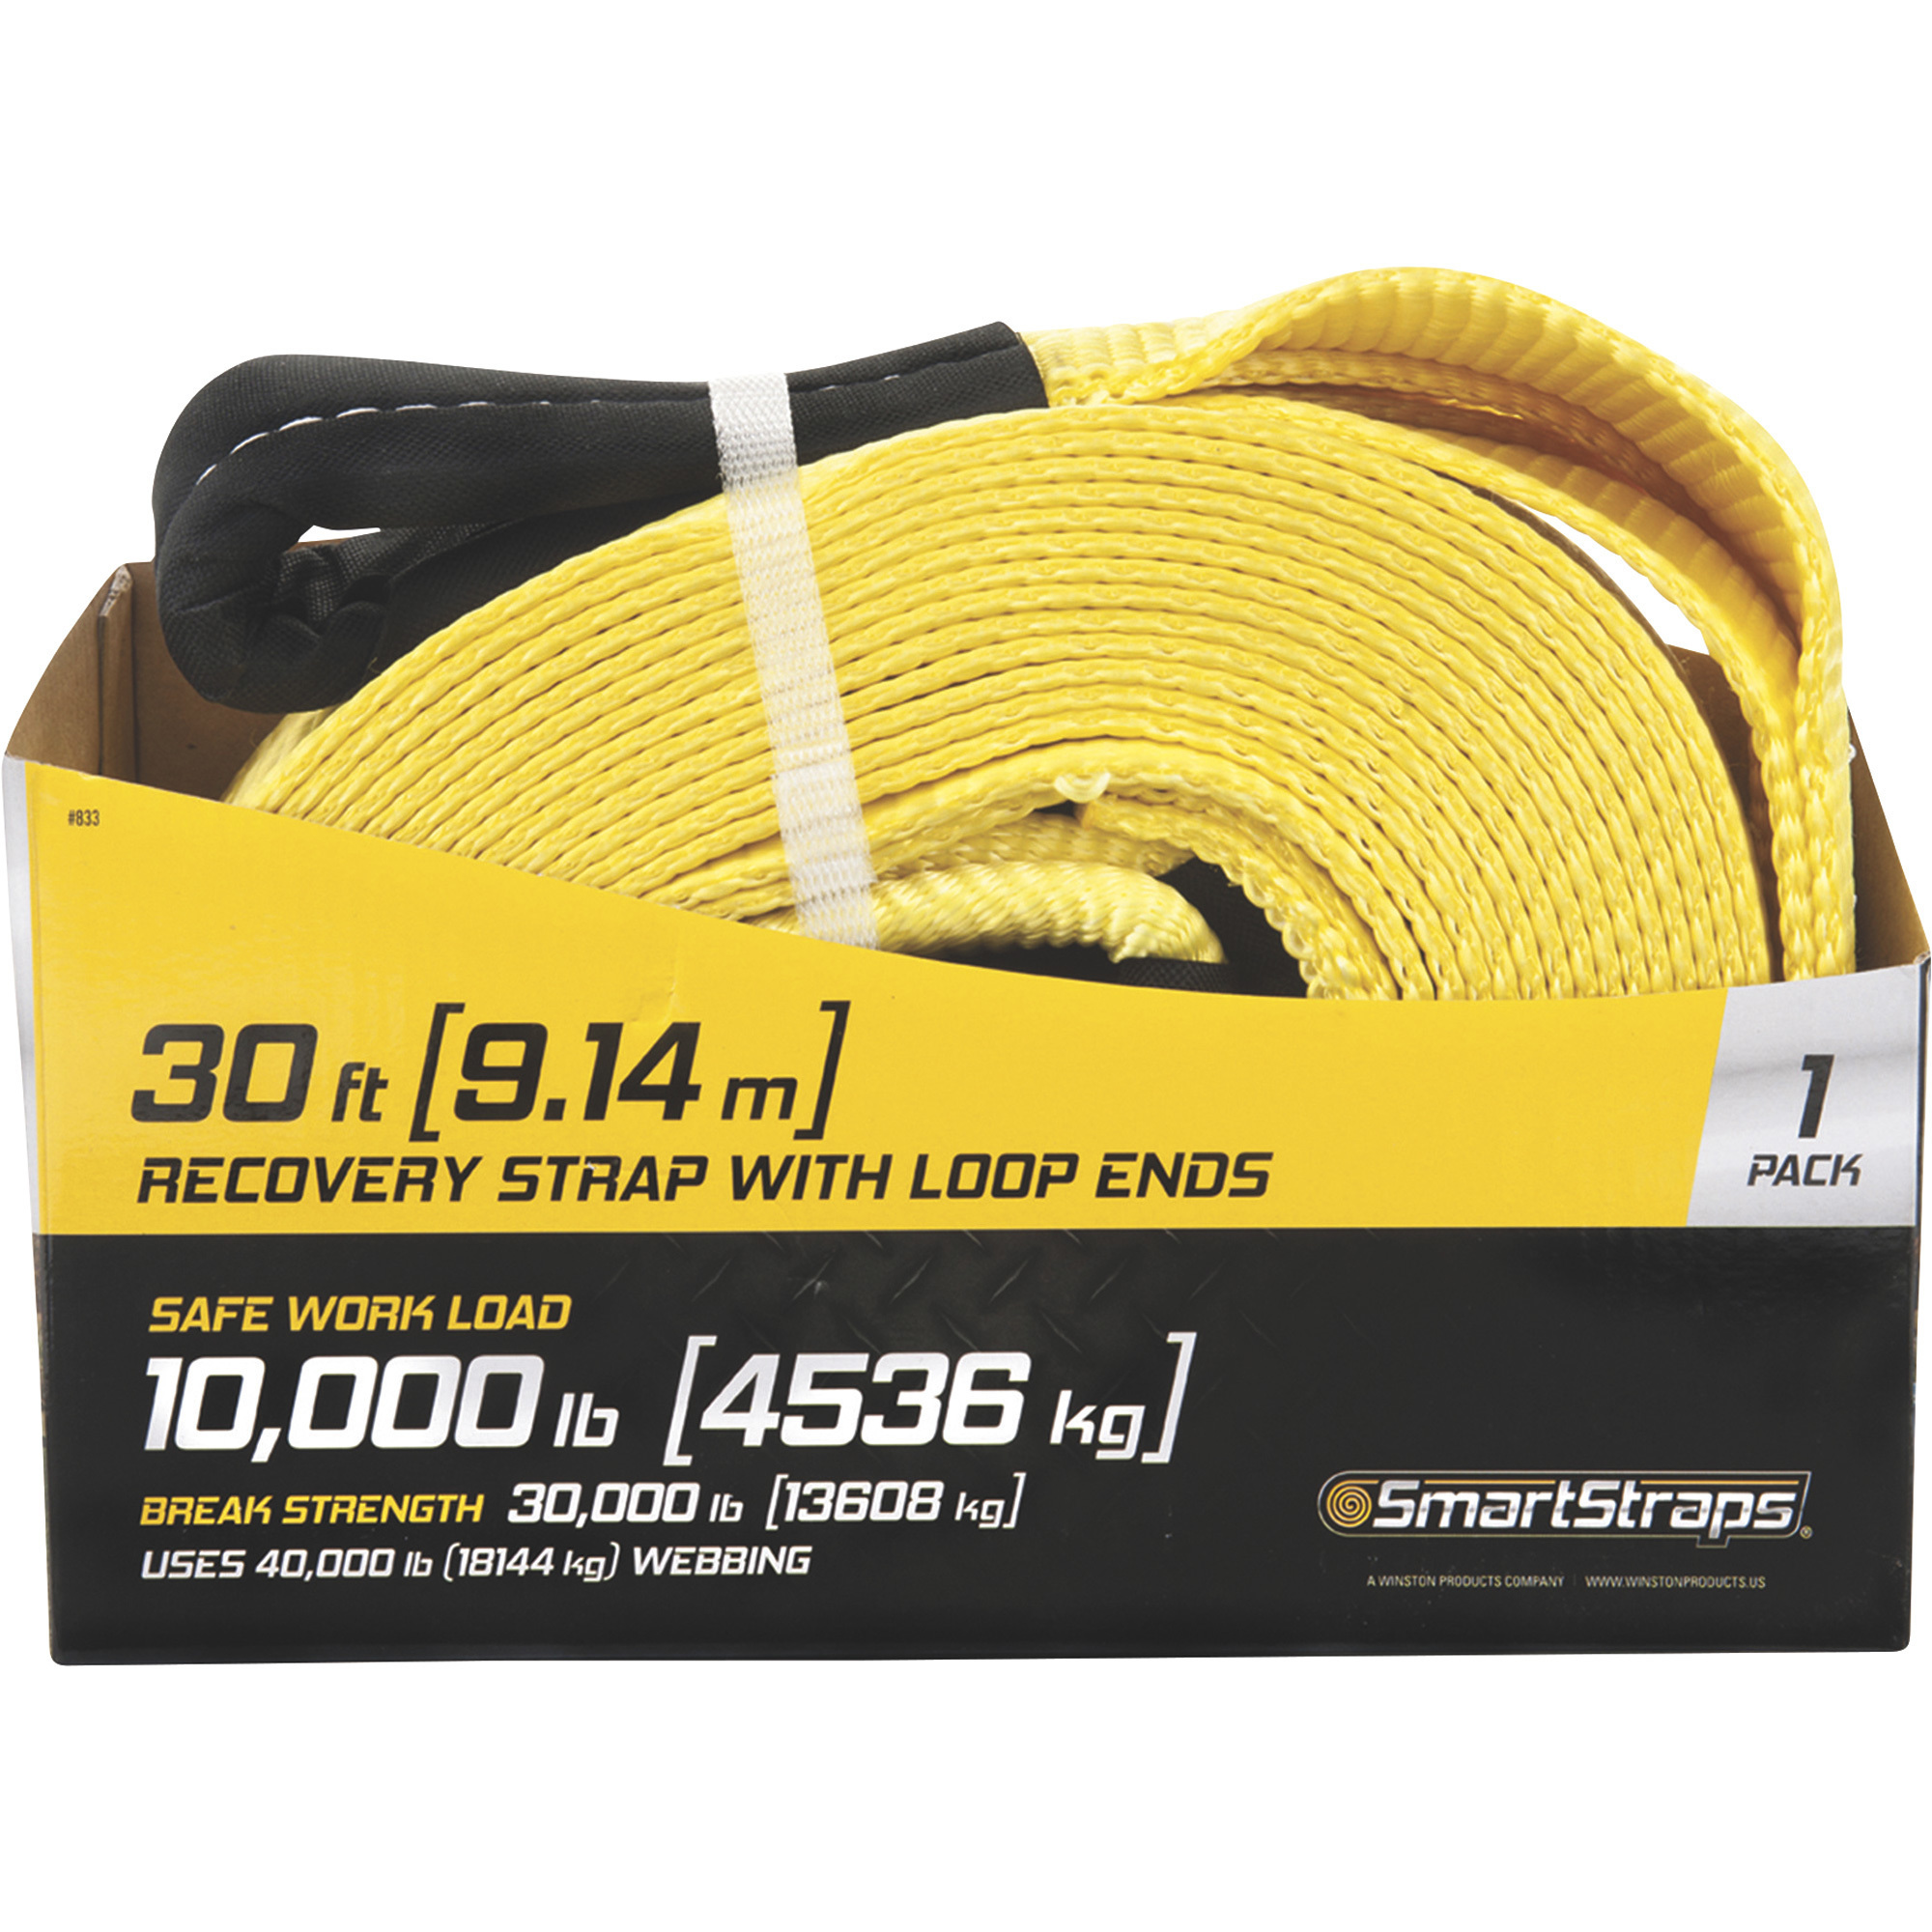 Smart Straps Heavy-Duty Recovery Tow Strap with Loop Ends, 30ft.L